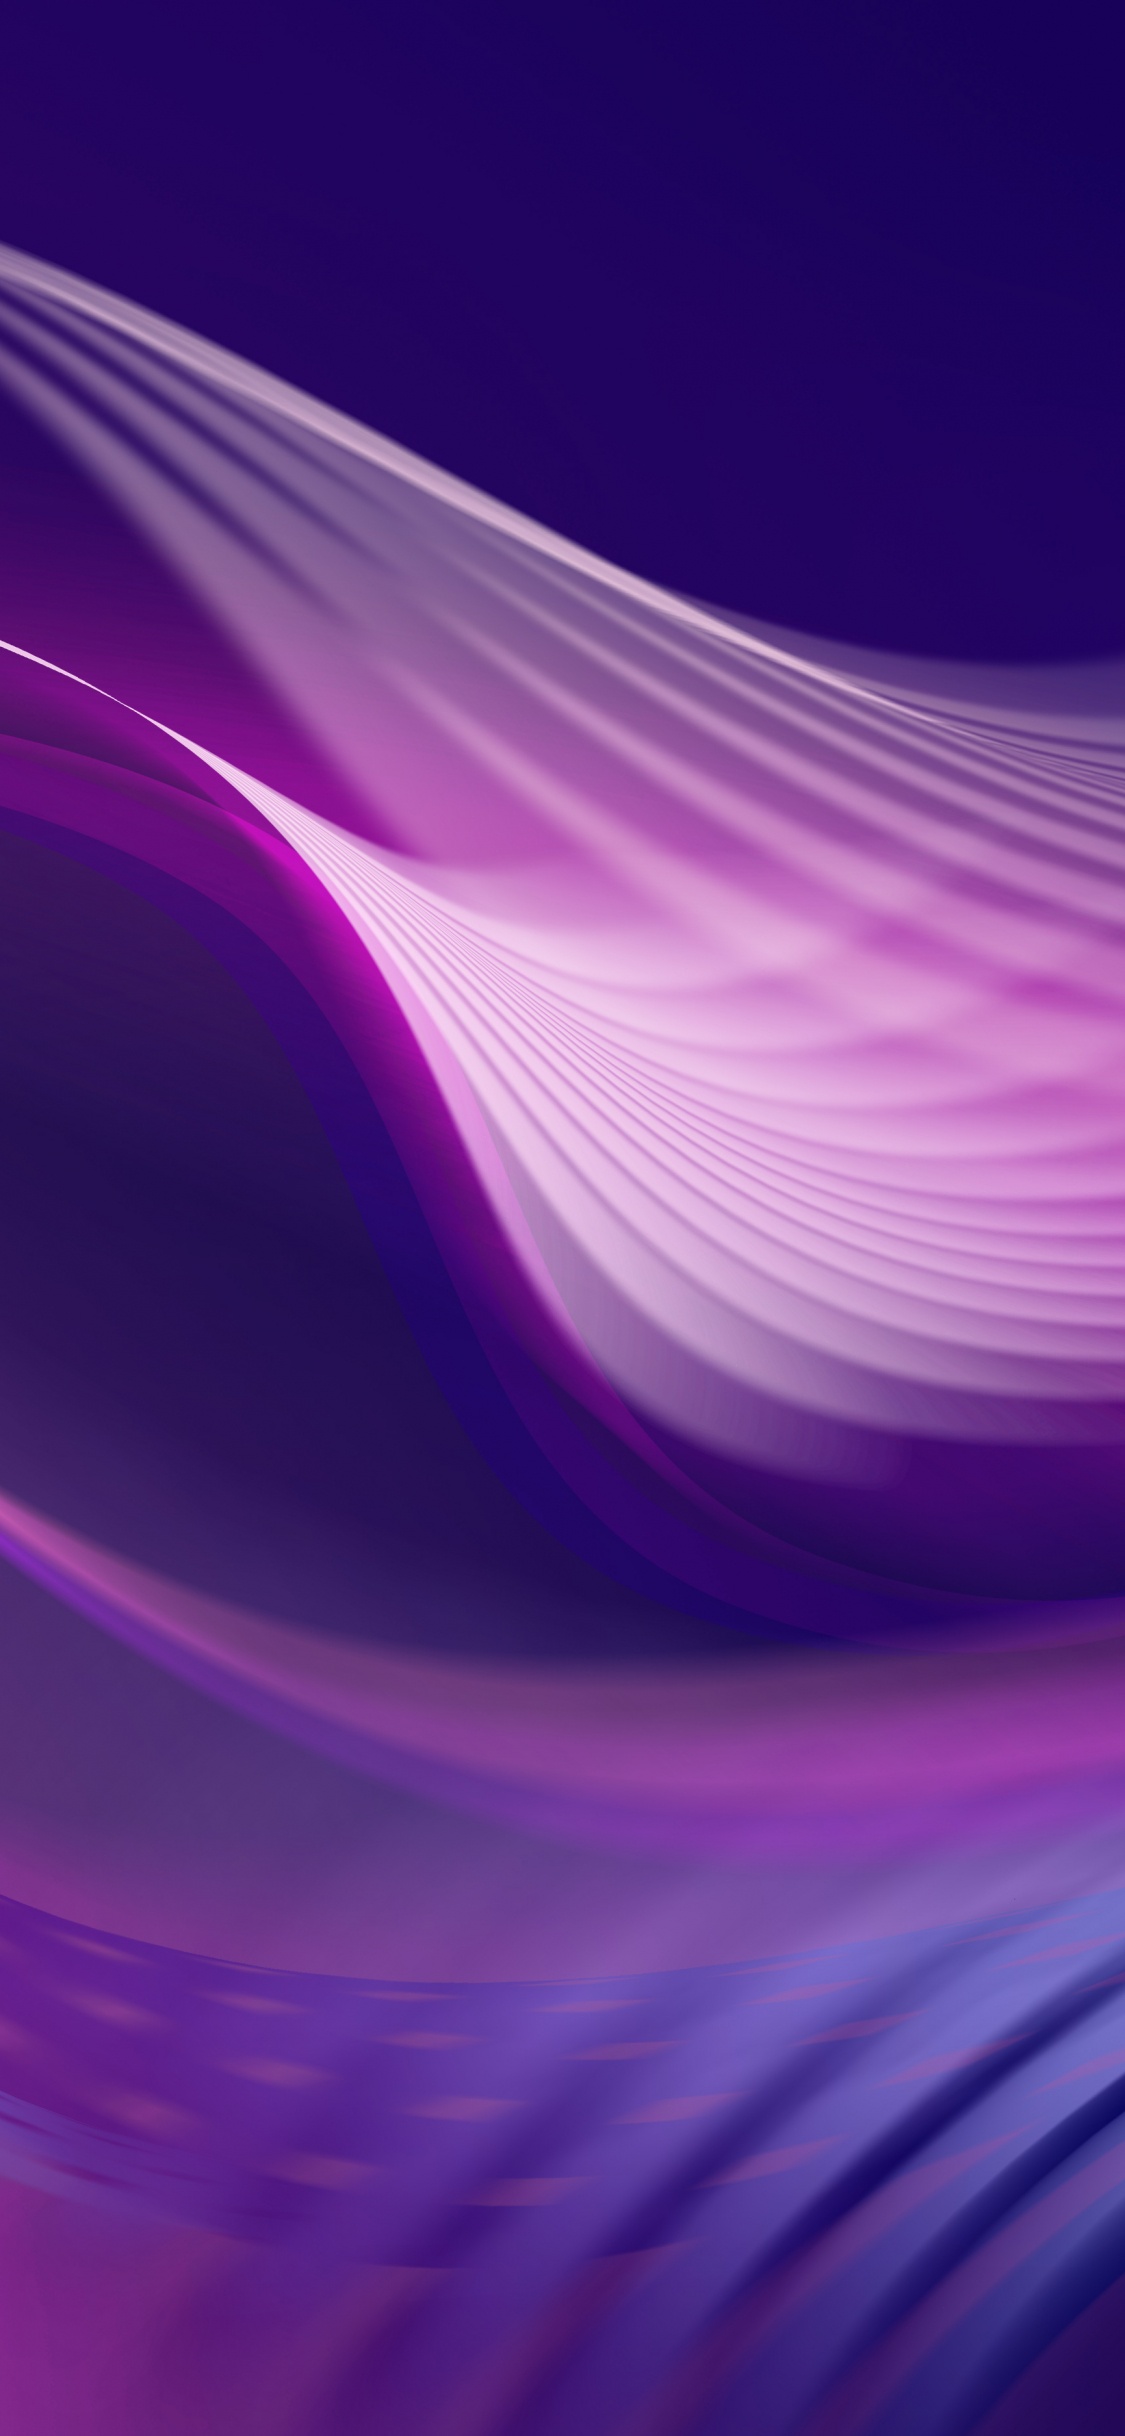 Purple and White Light Illustration. Wallpaper in 1125x2436 Resolution